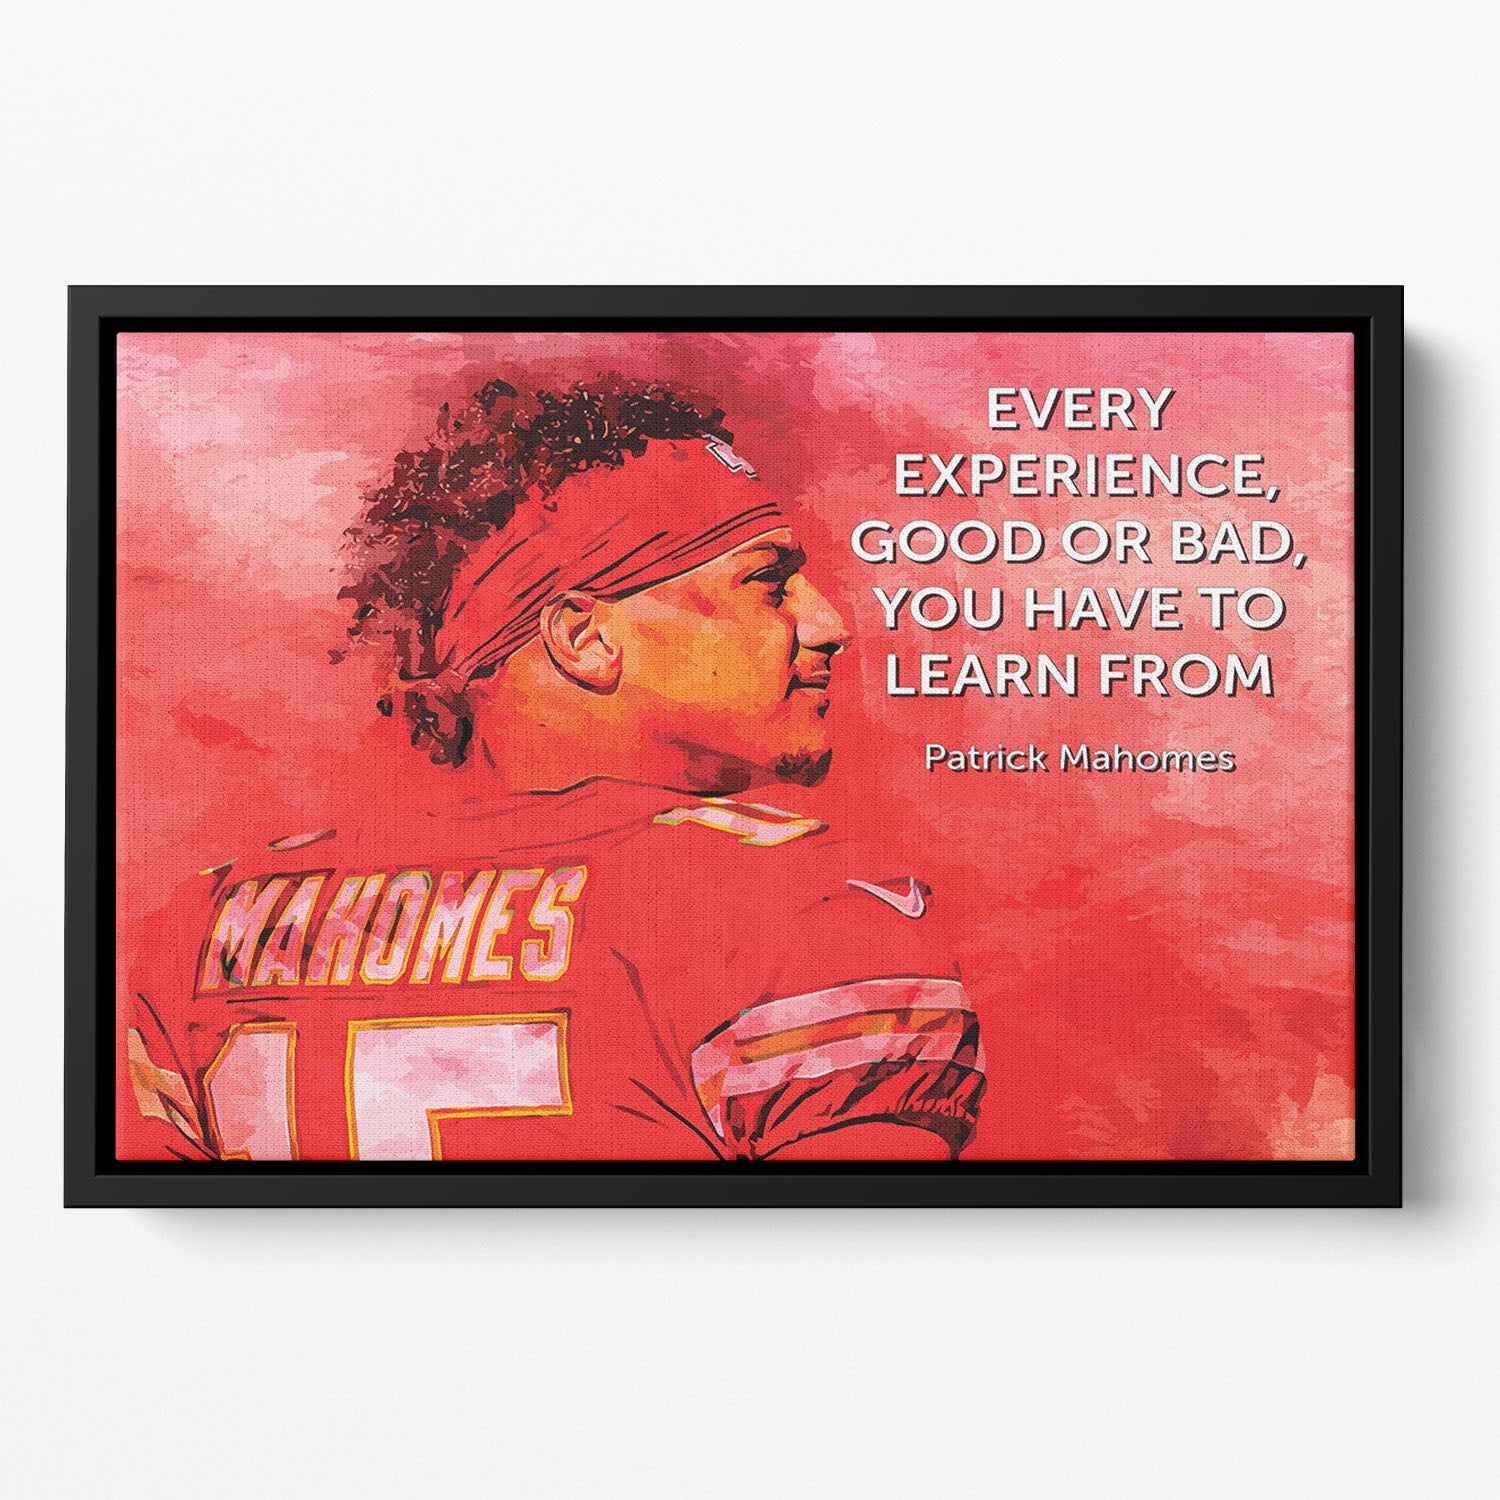 Patrick Mahomes Quote Floating Framed Canvas - Canvas Art Rocks - 2